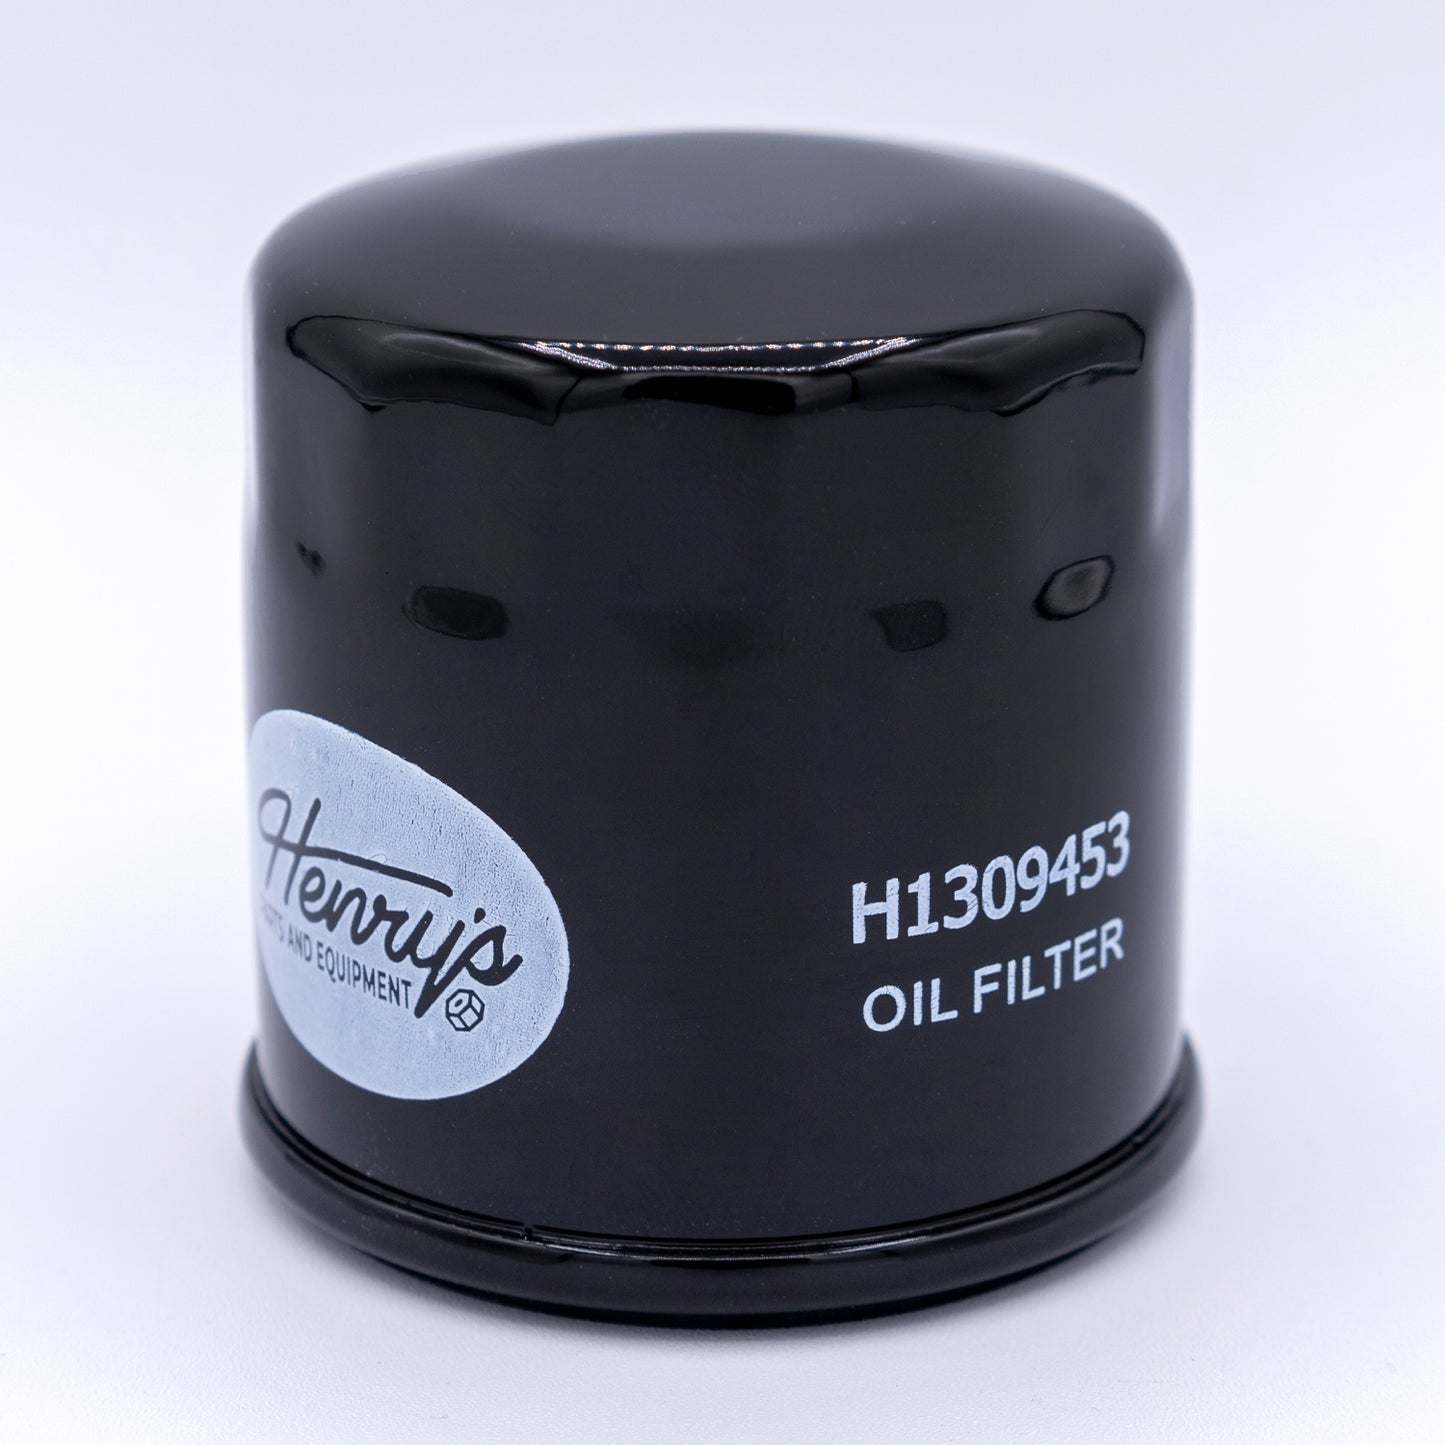 HENRY'S OIL FILTER 25-30 MICRON    H1309453